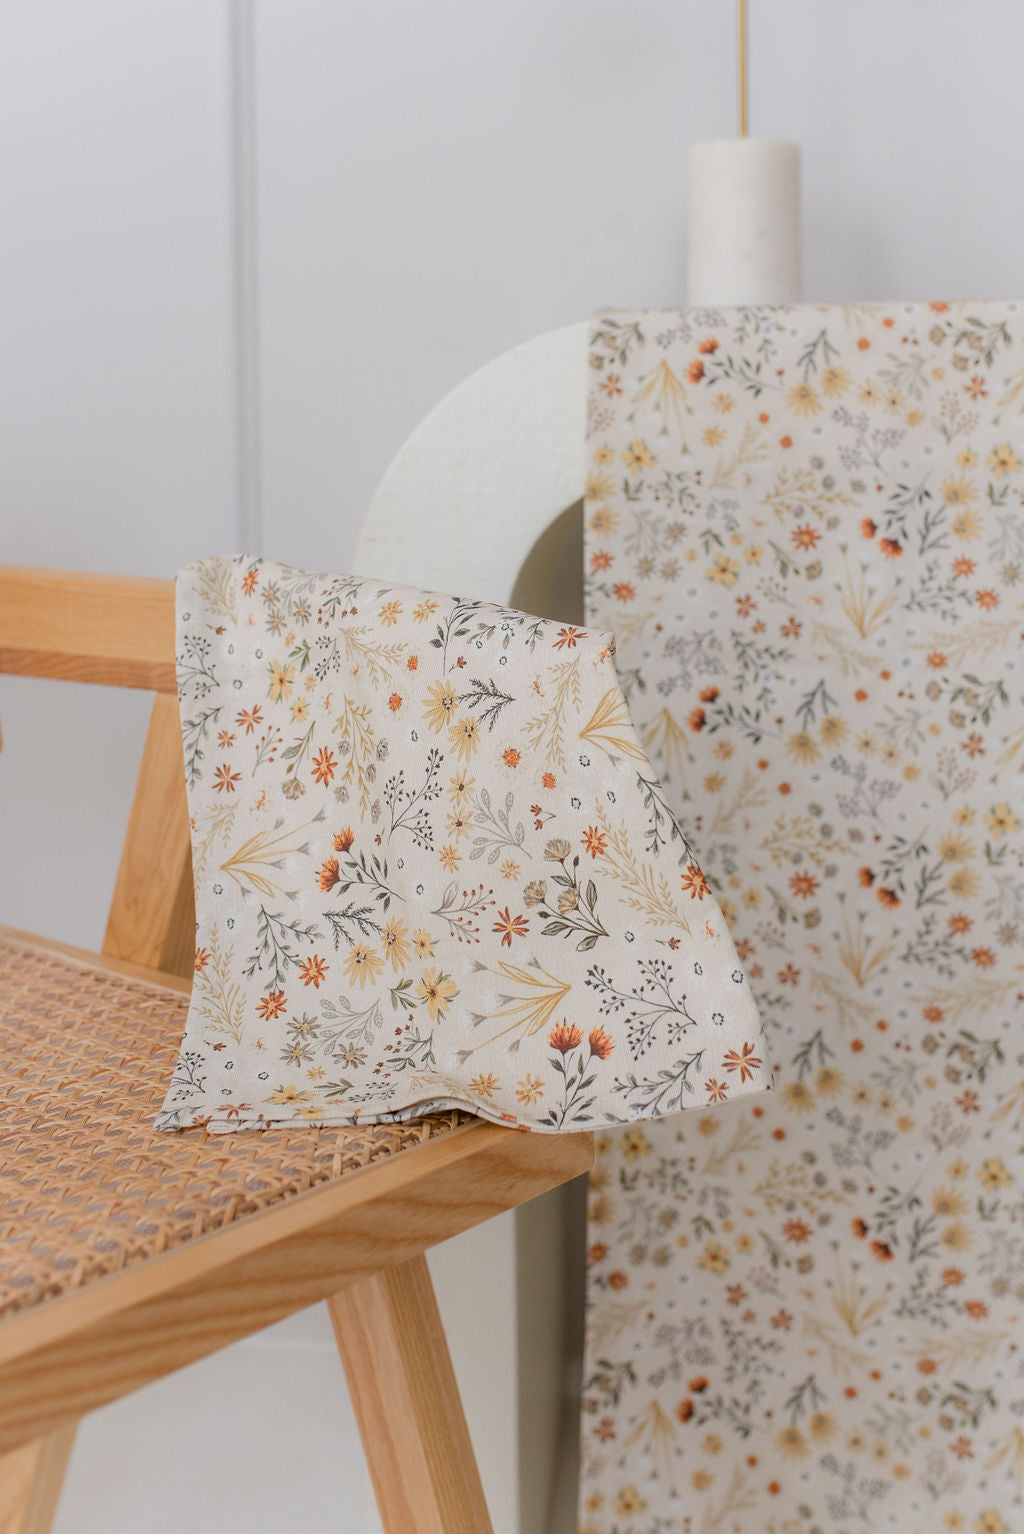 fall meadow napkin drapped over light cane chair